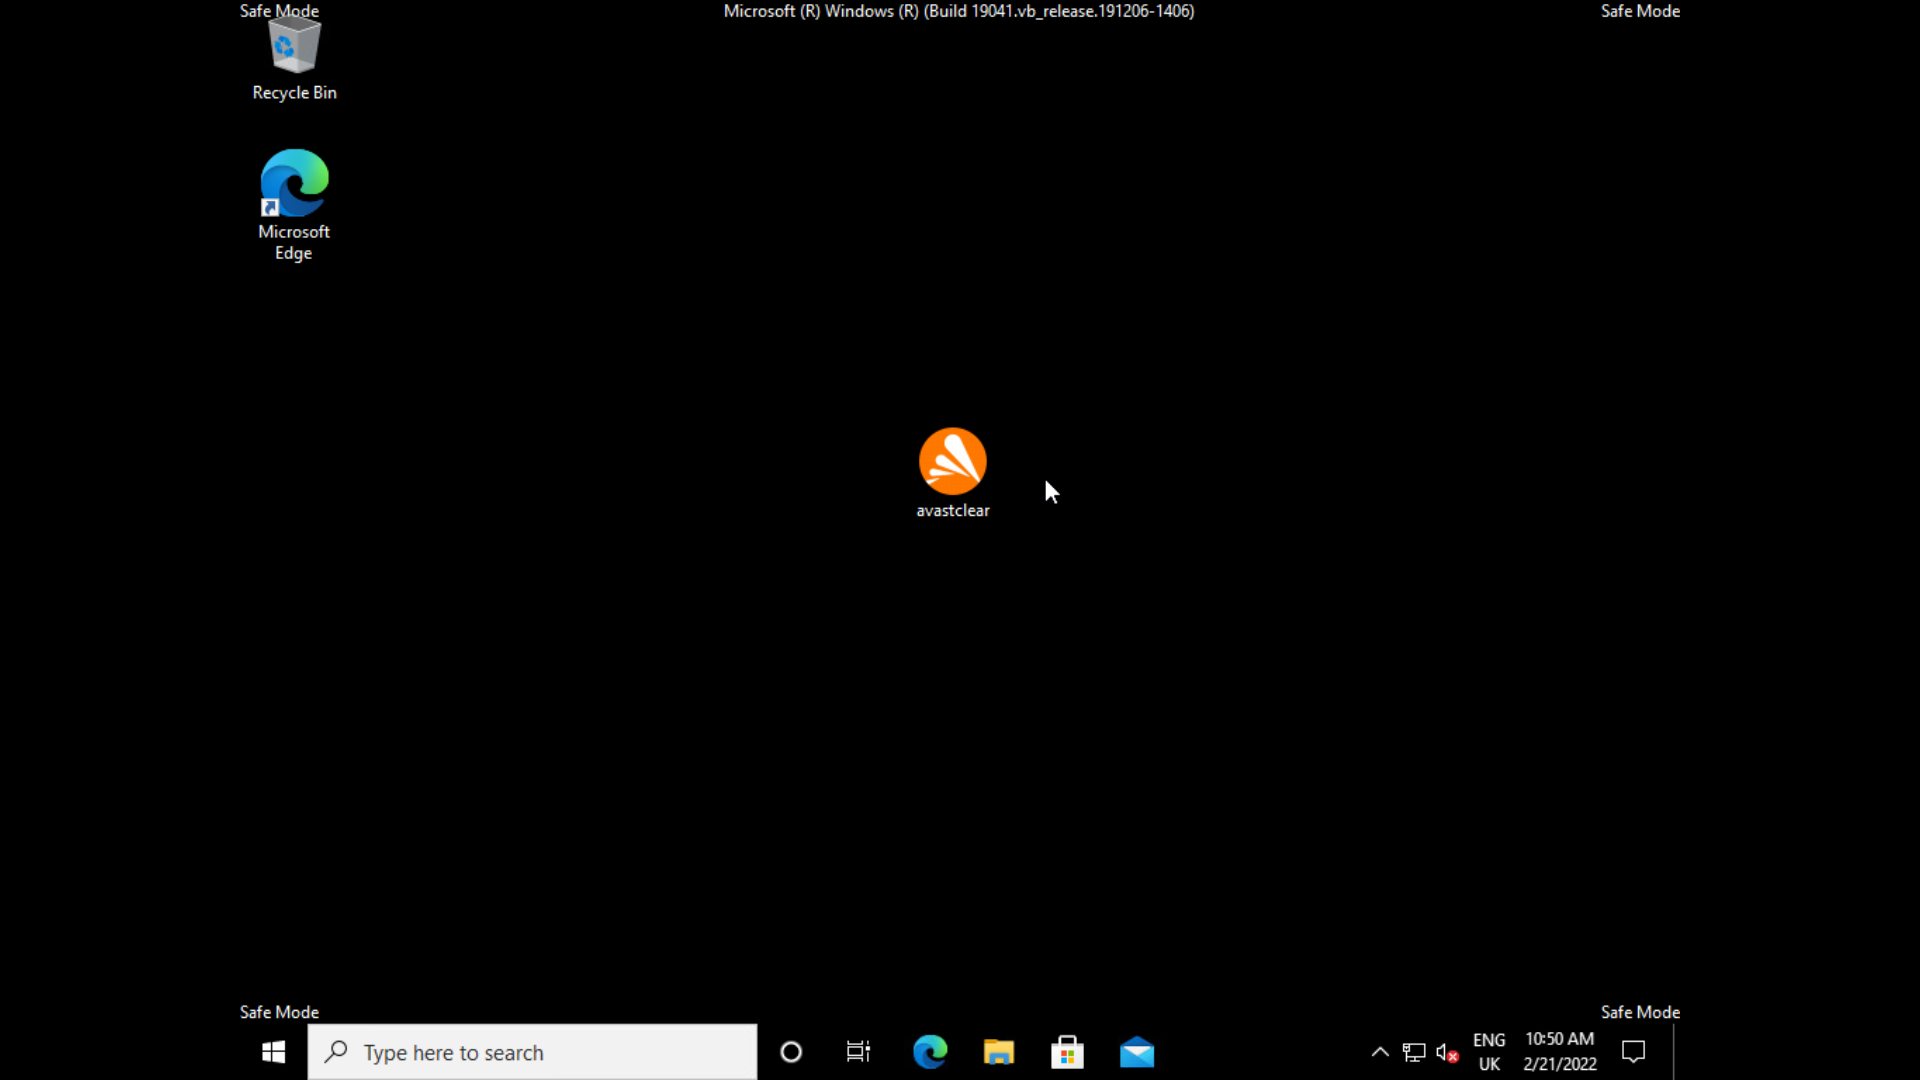 Windows 10 booted to safe mode with avastclear on desktop